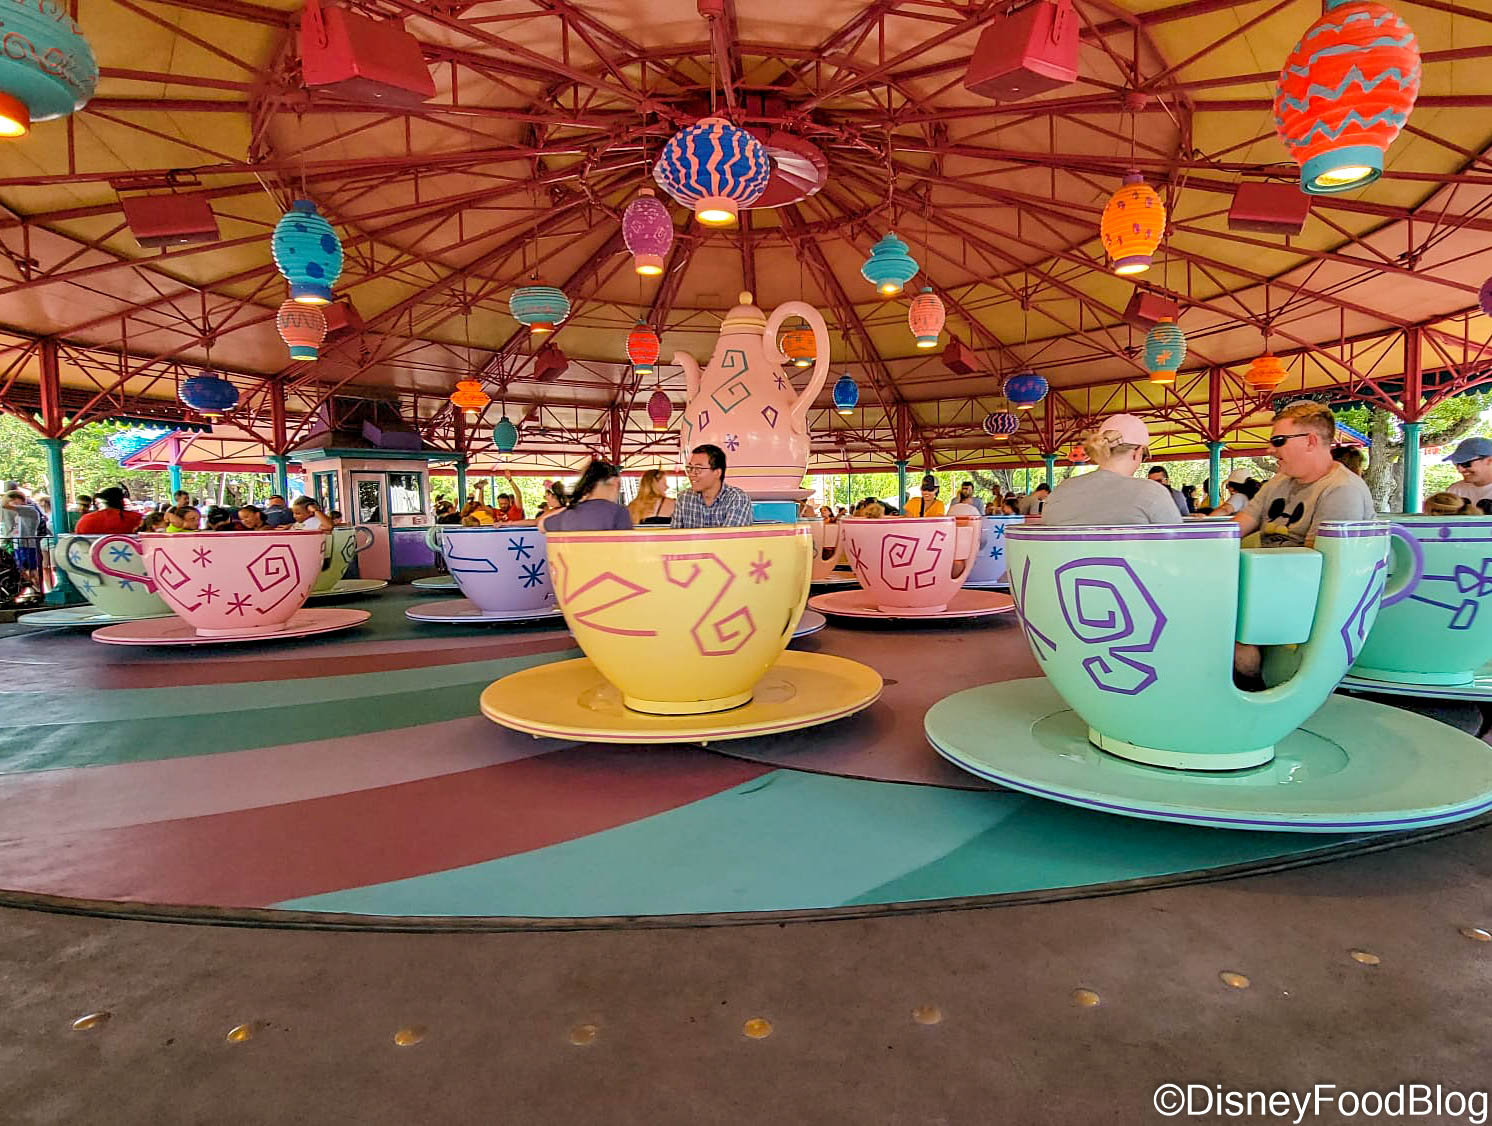 Shopping for Disney Teacup and Saucers